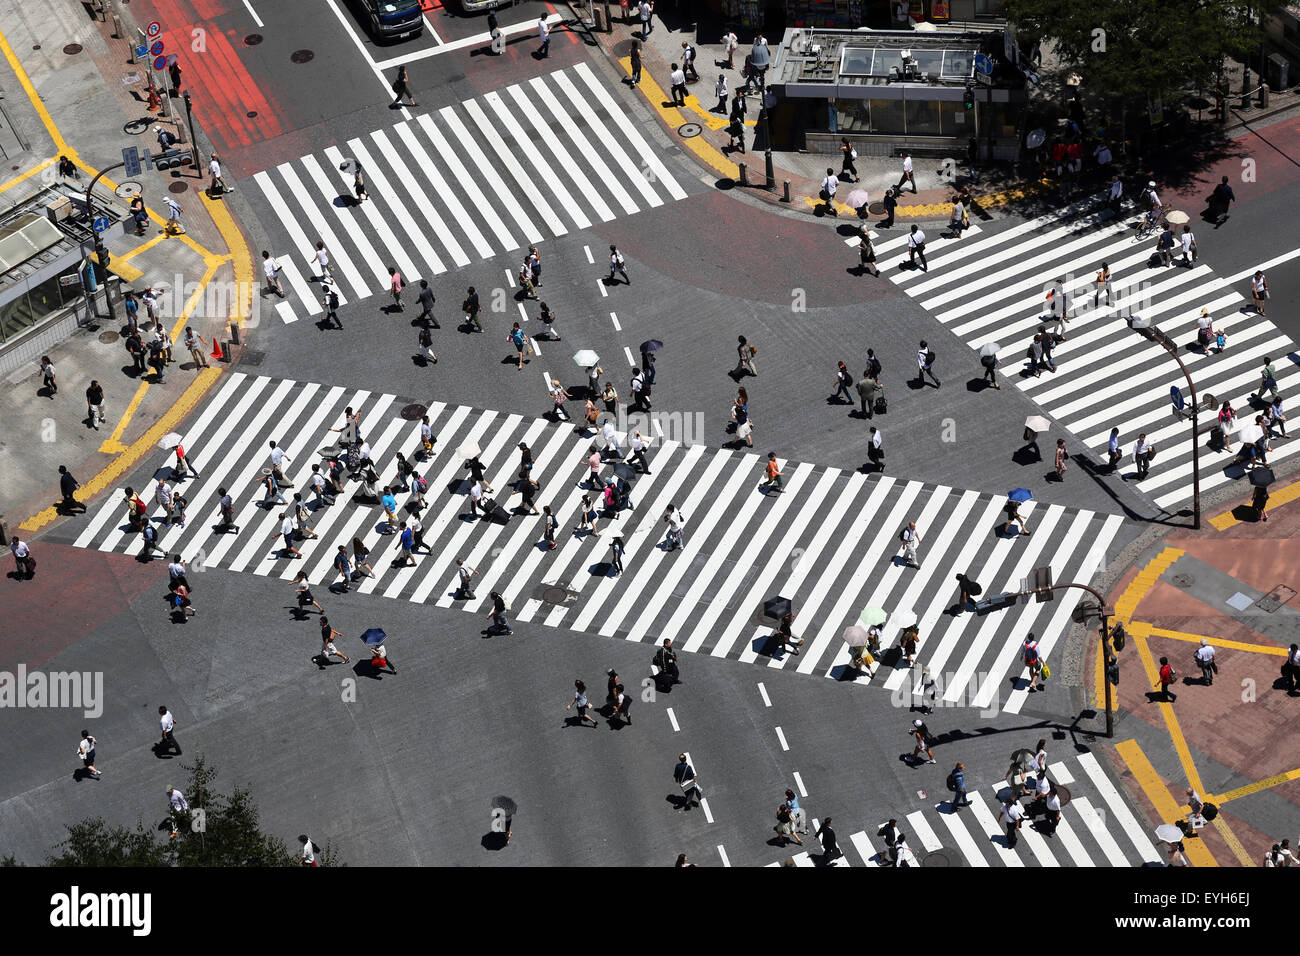 People crossing the pedestrian crossing at the intersection in Shibuya, Tokyo, Japan Stock Photo